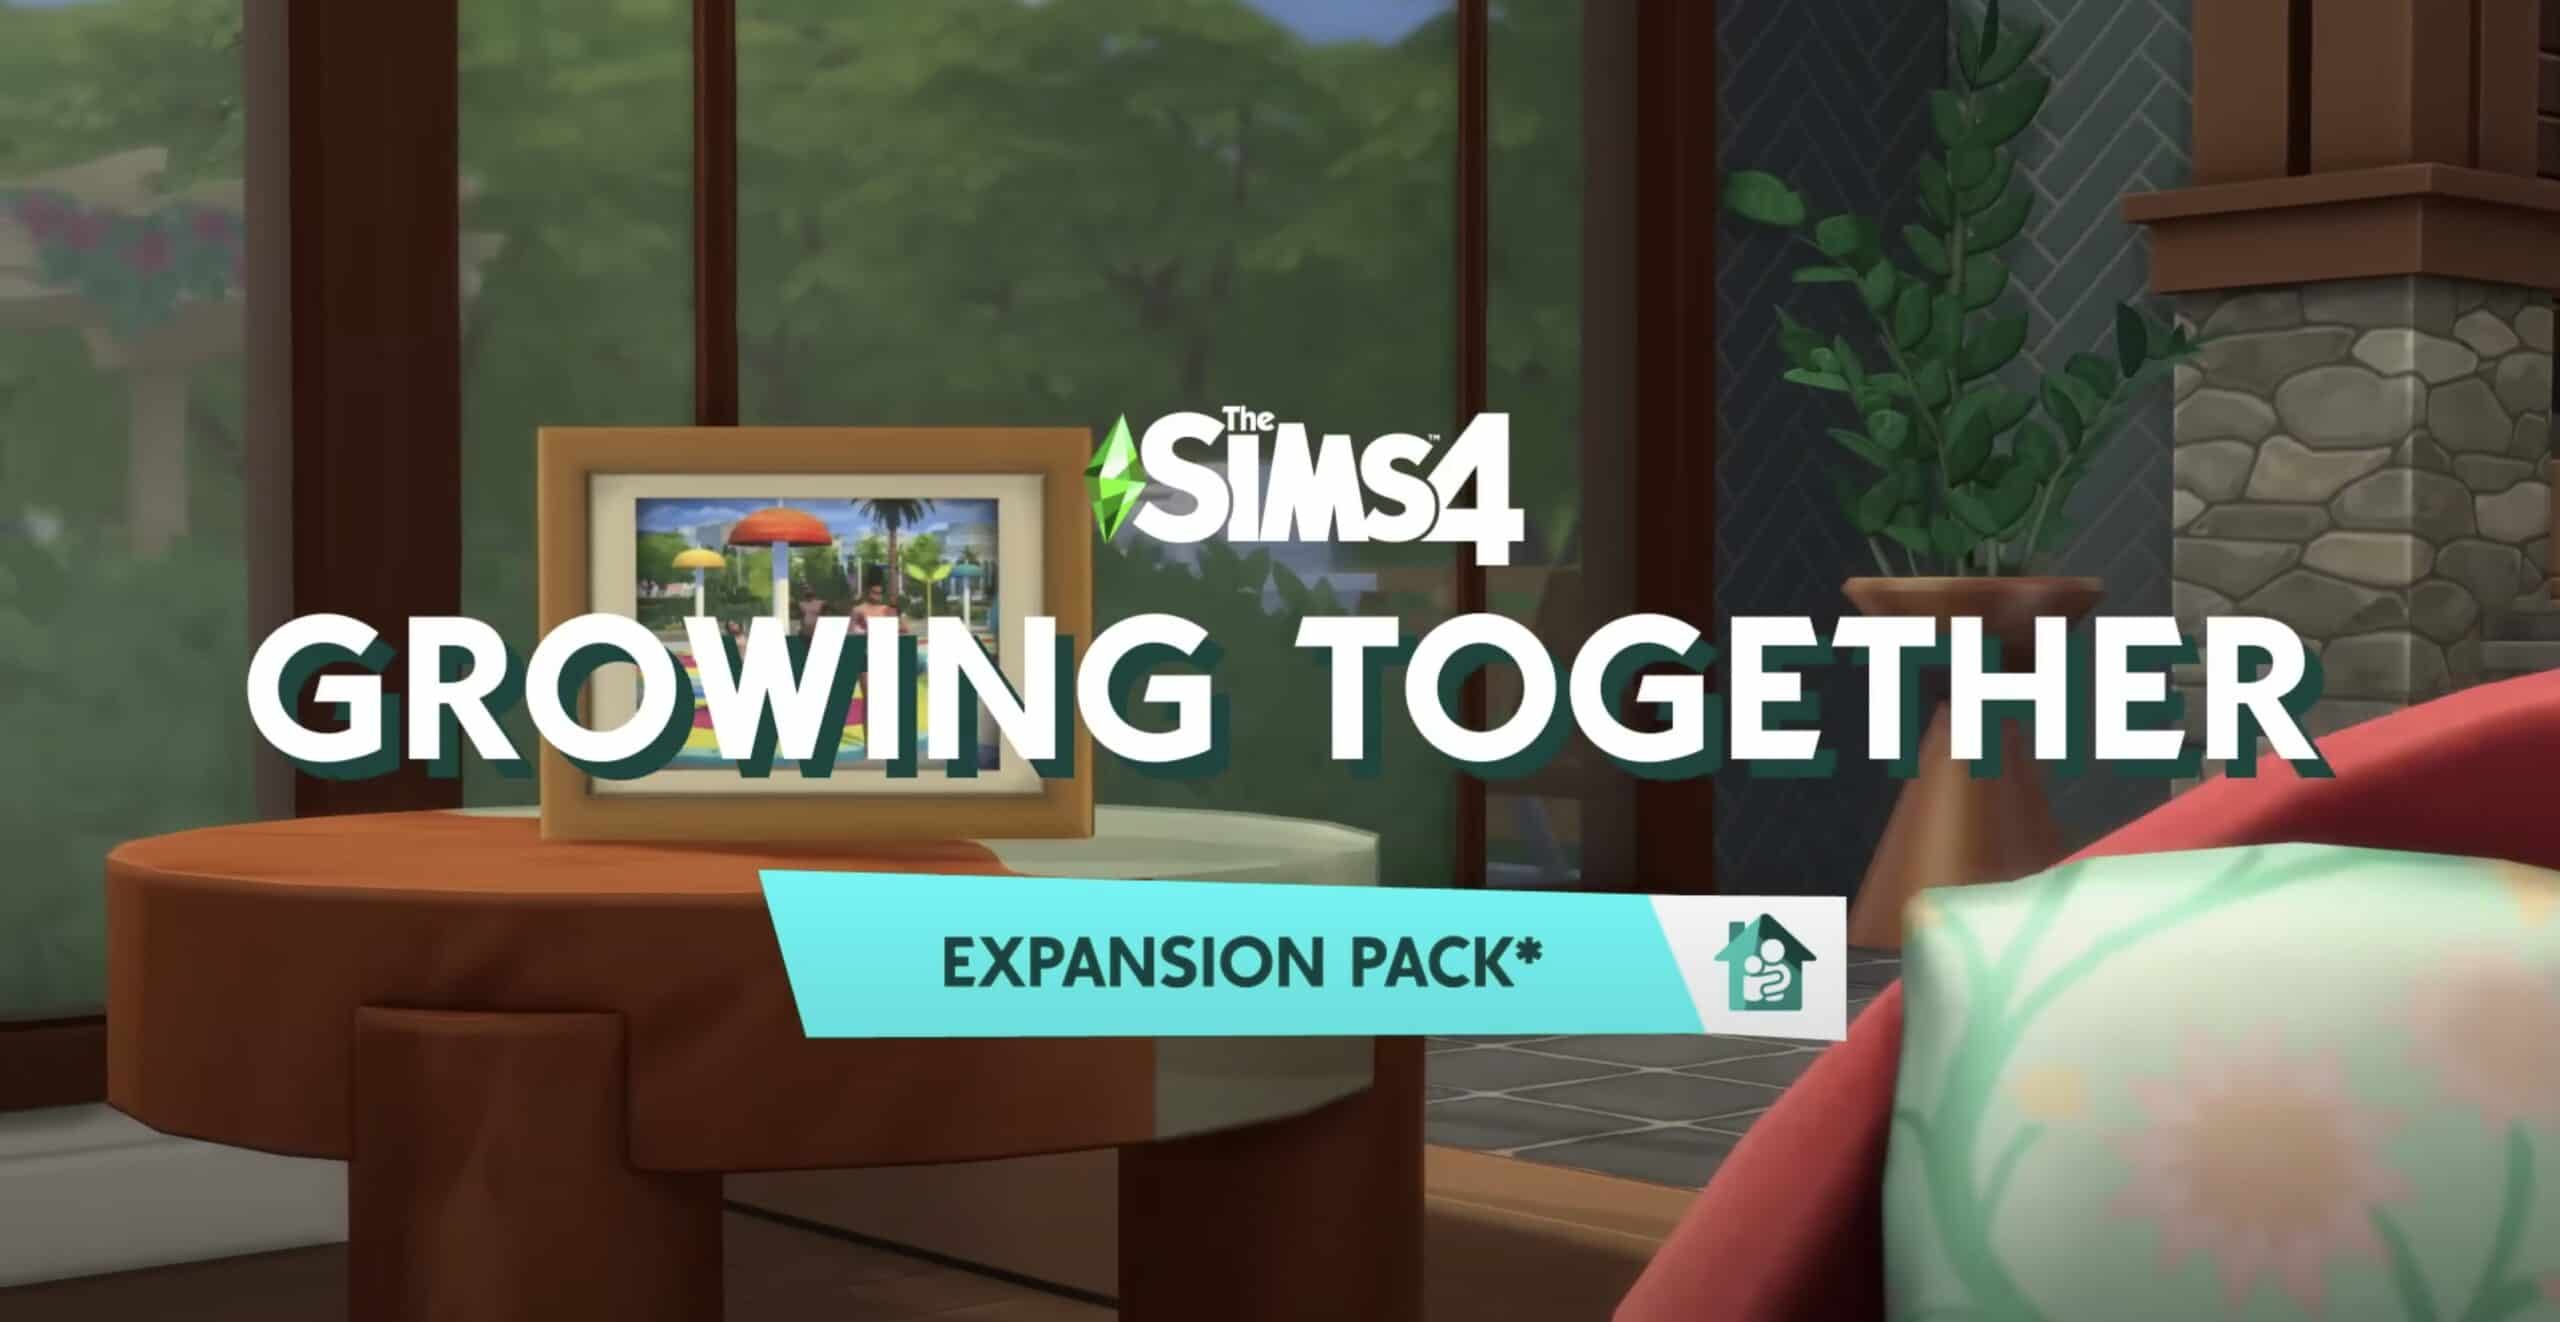 FREE The Sims 4 confirmed by EA! The game will be free-2-play next month (